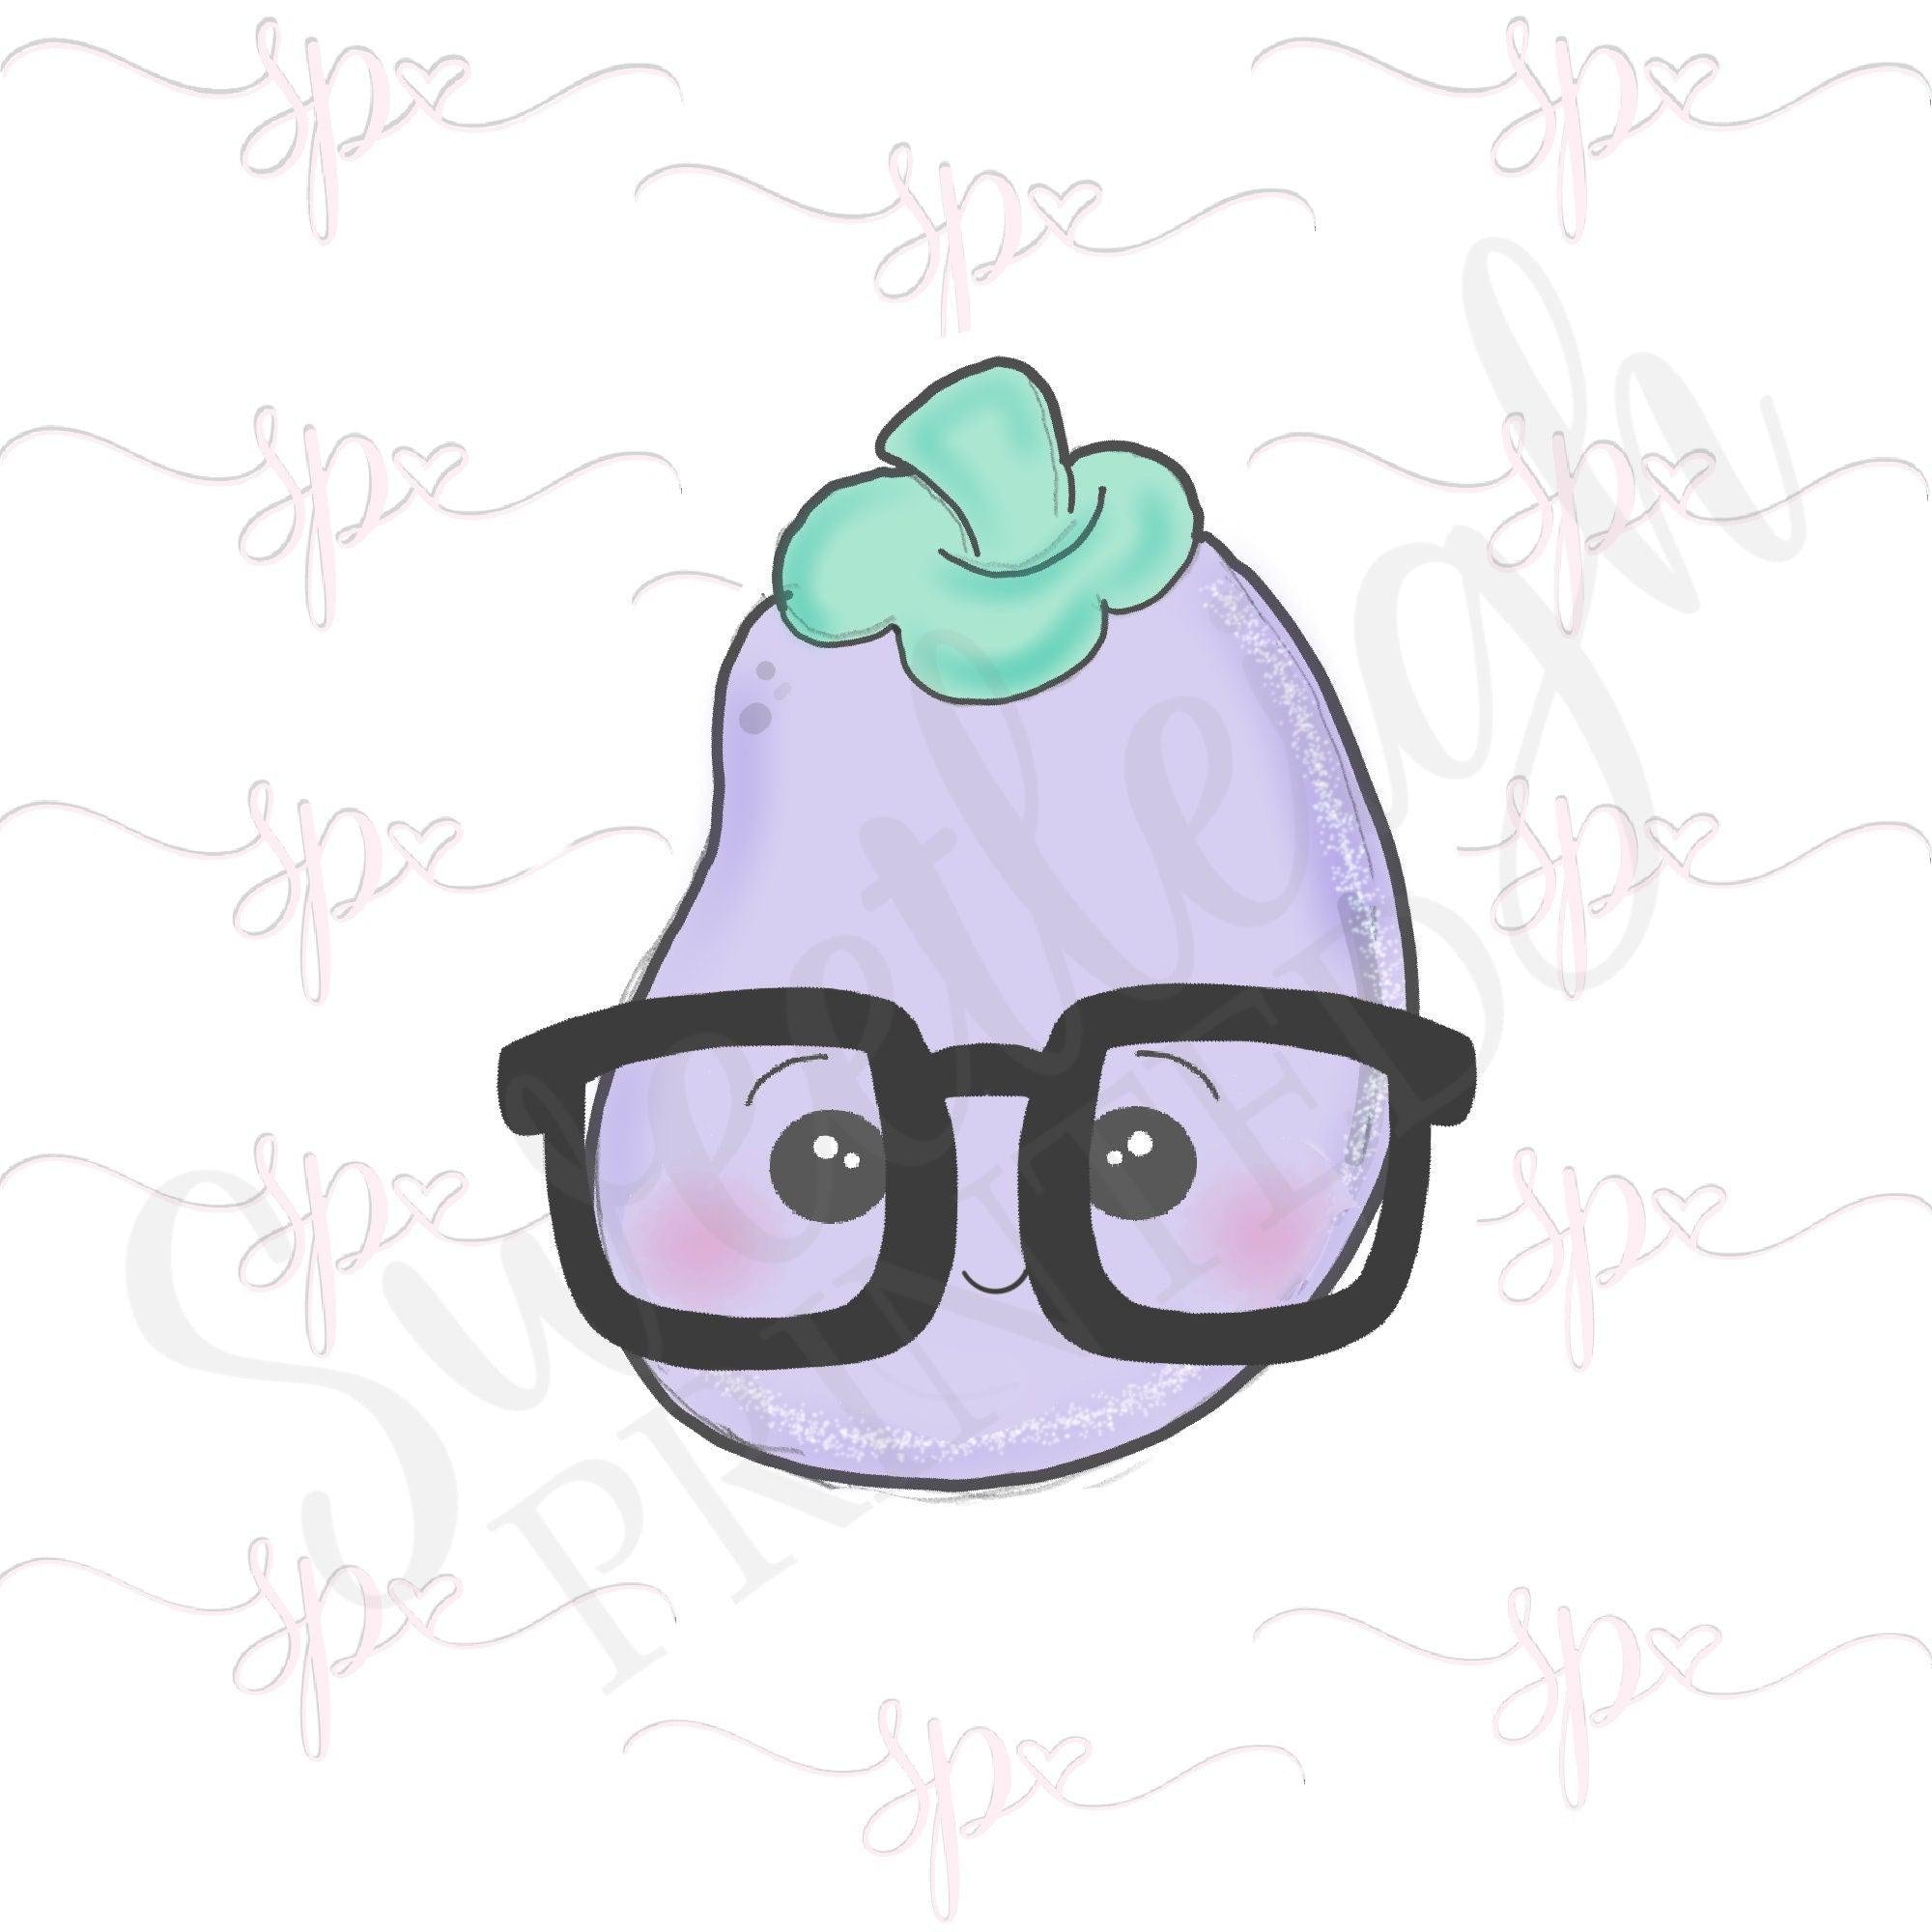 Nerdy Eggplant Cookie Cutter - Sweetleigh 